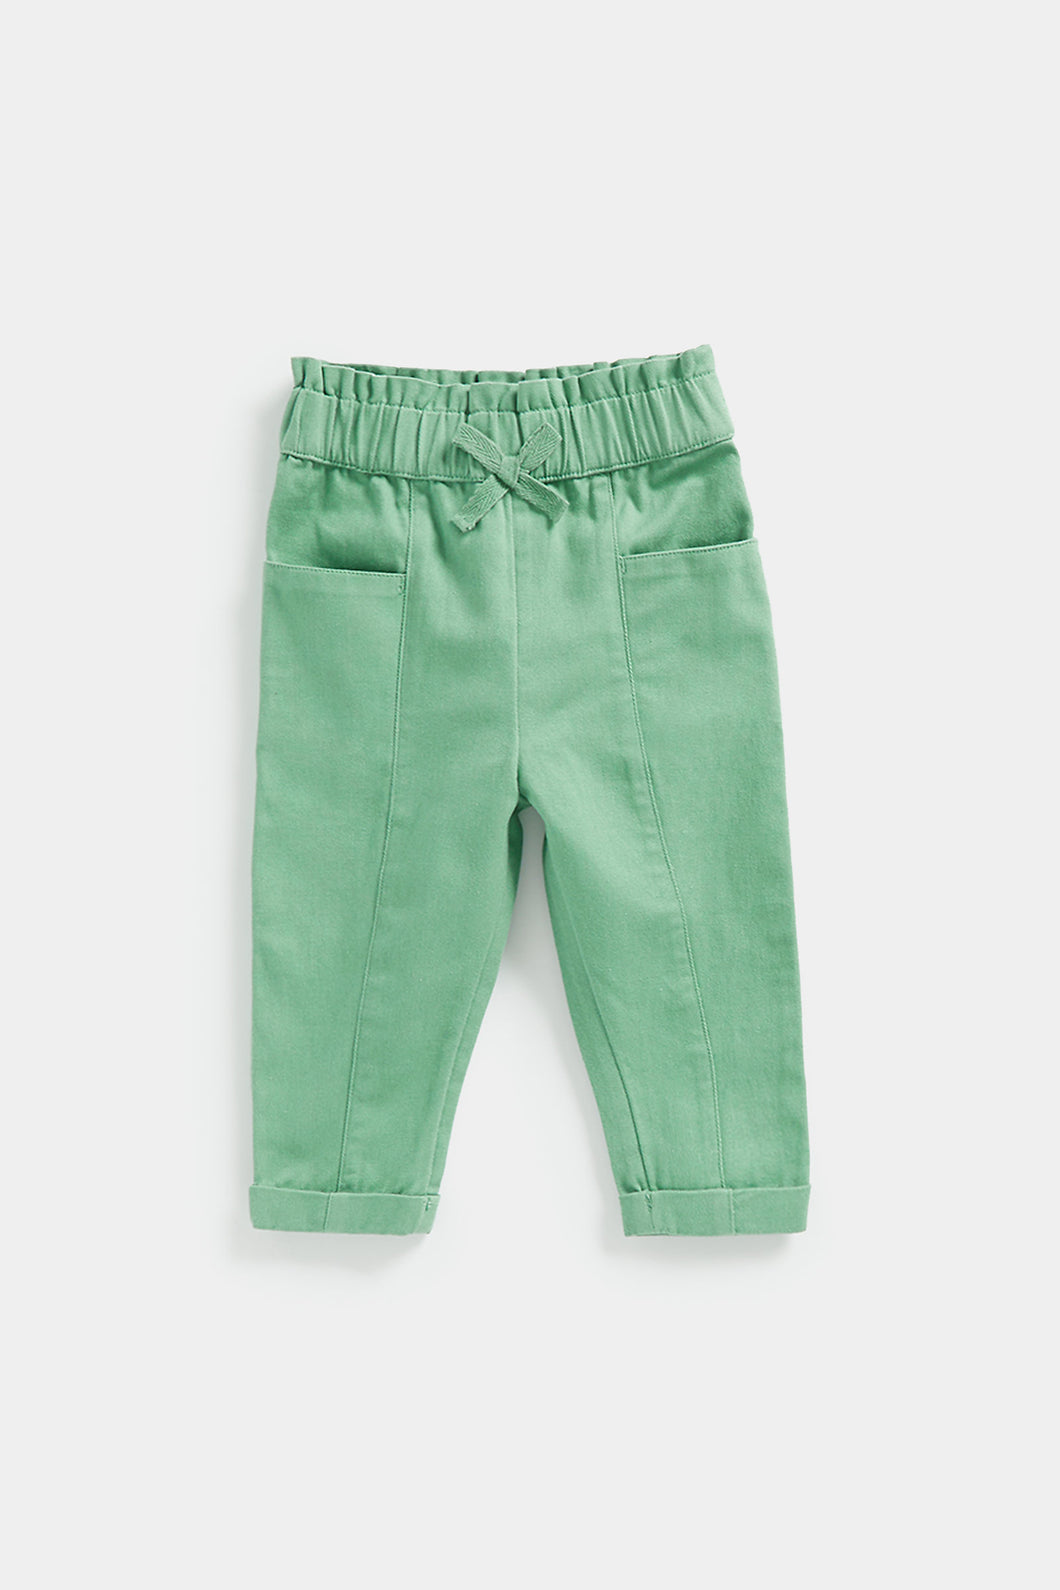 Mothercare Pink Twill Trousers